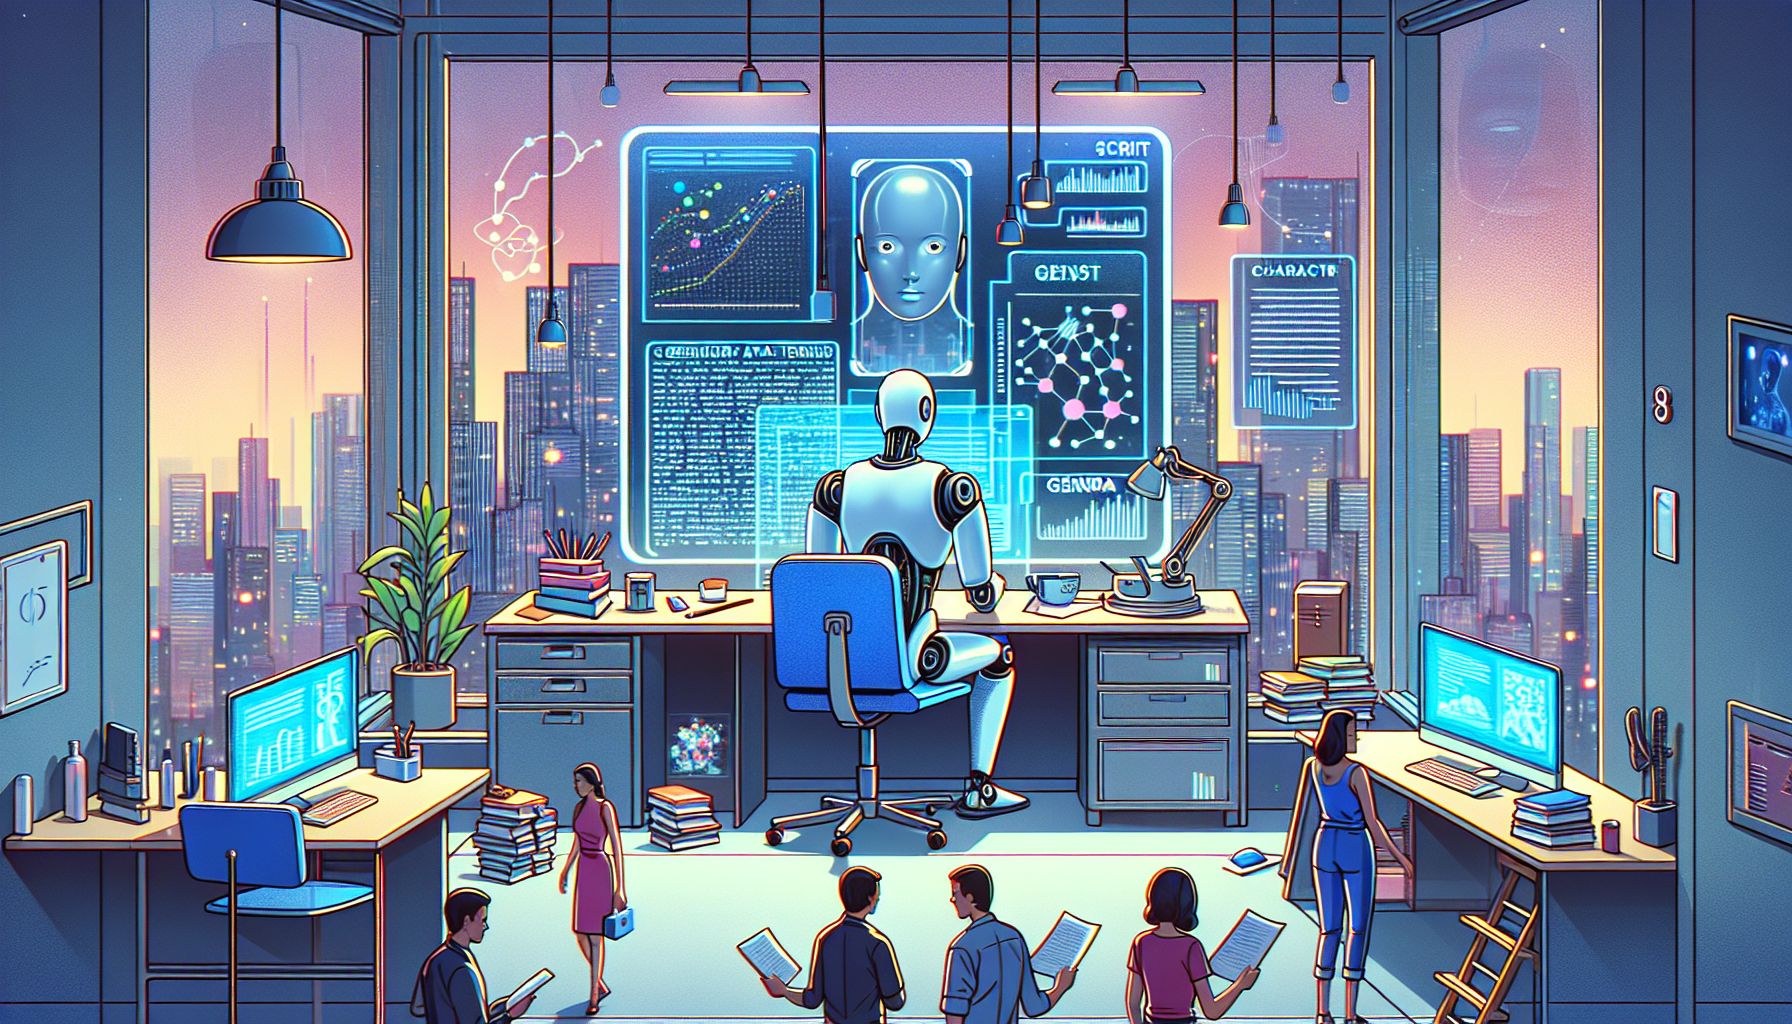 A futuristic AI robot sitting at a cluttered desk, analyzing multiple film scripts surrounded by digital holographic screens displaying script analytics, genre patterns, and character development grap